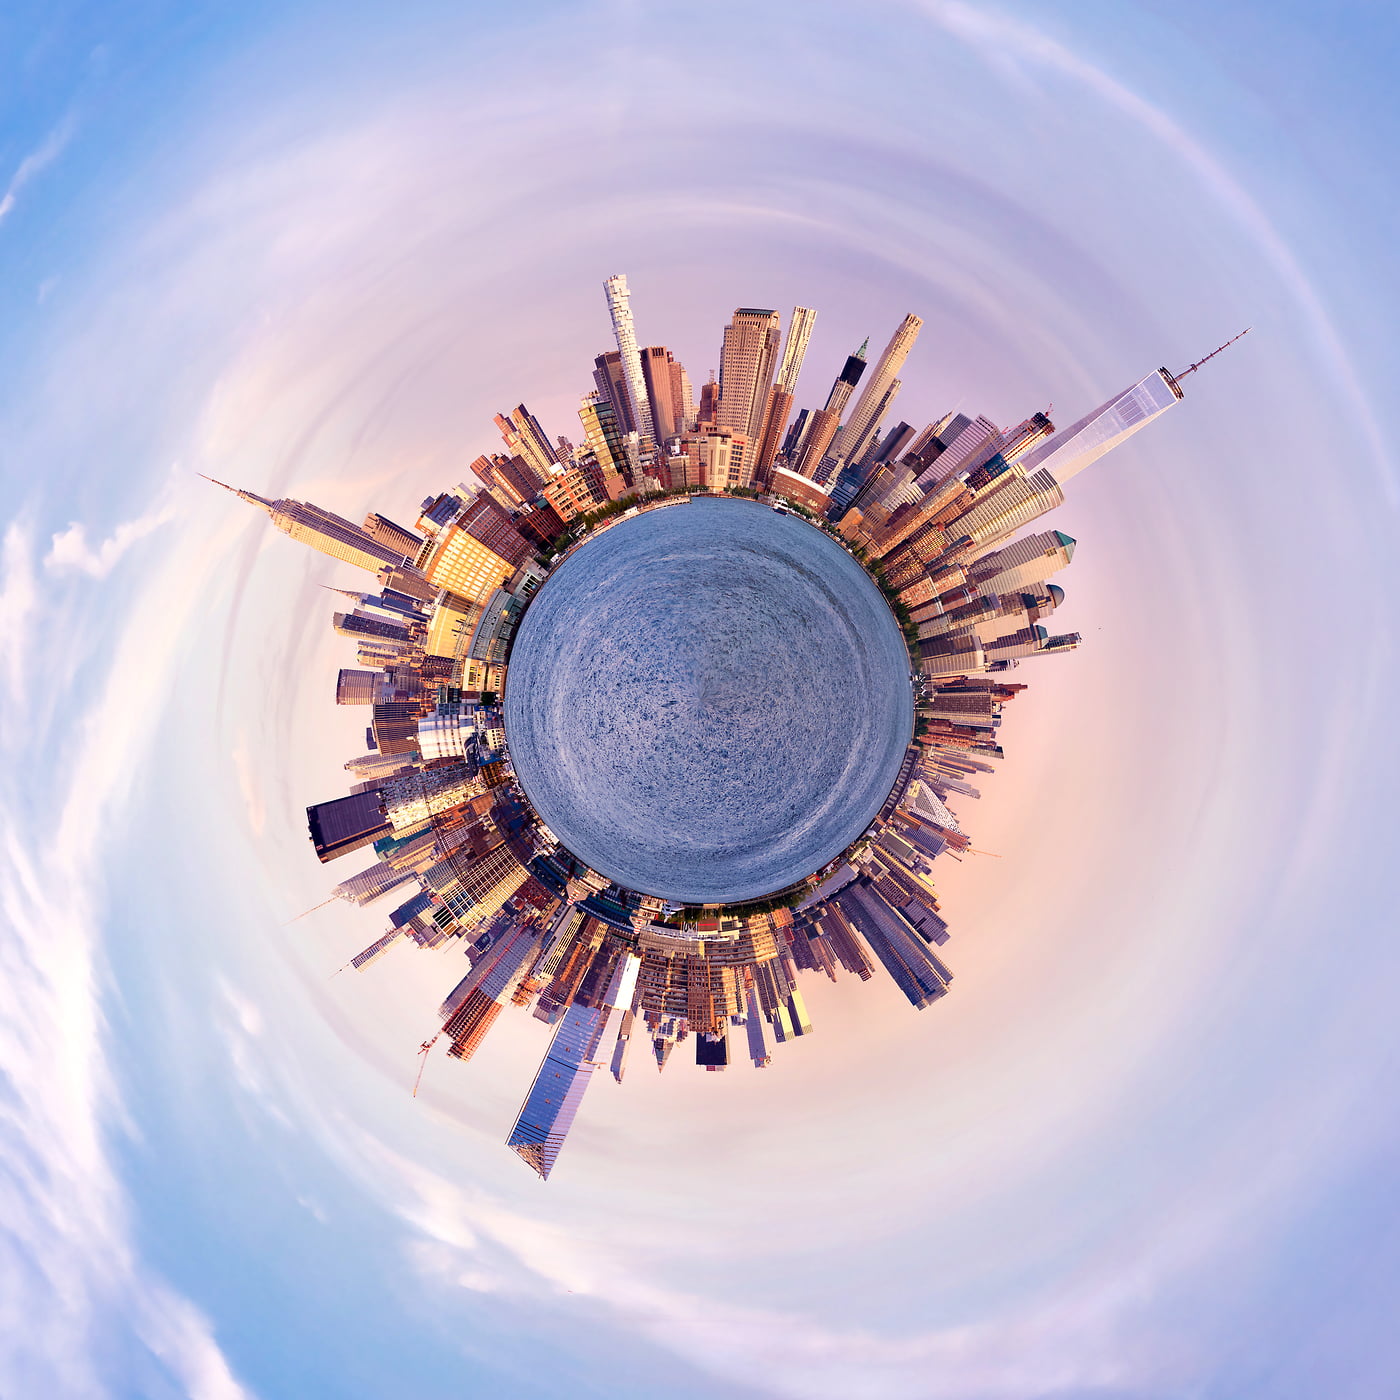 304 megapixels! A very high definition abstract spherical planet VAST photo of the Manhattan skyline skyscrapers in New York City; cityscape artwork created by Dan Piech.